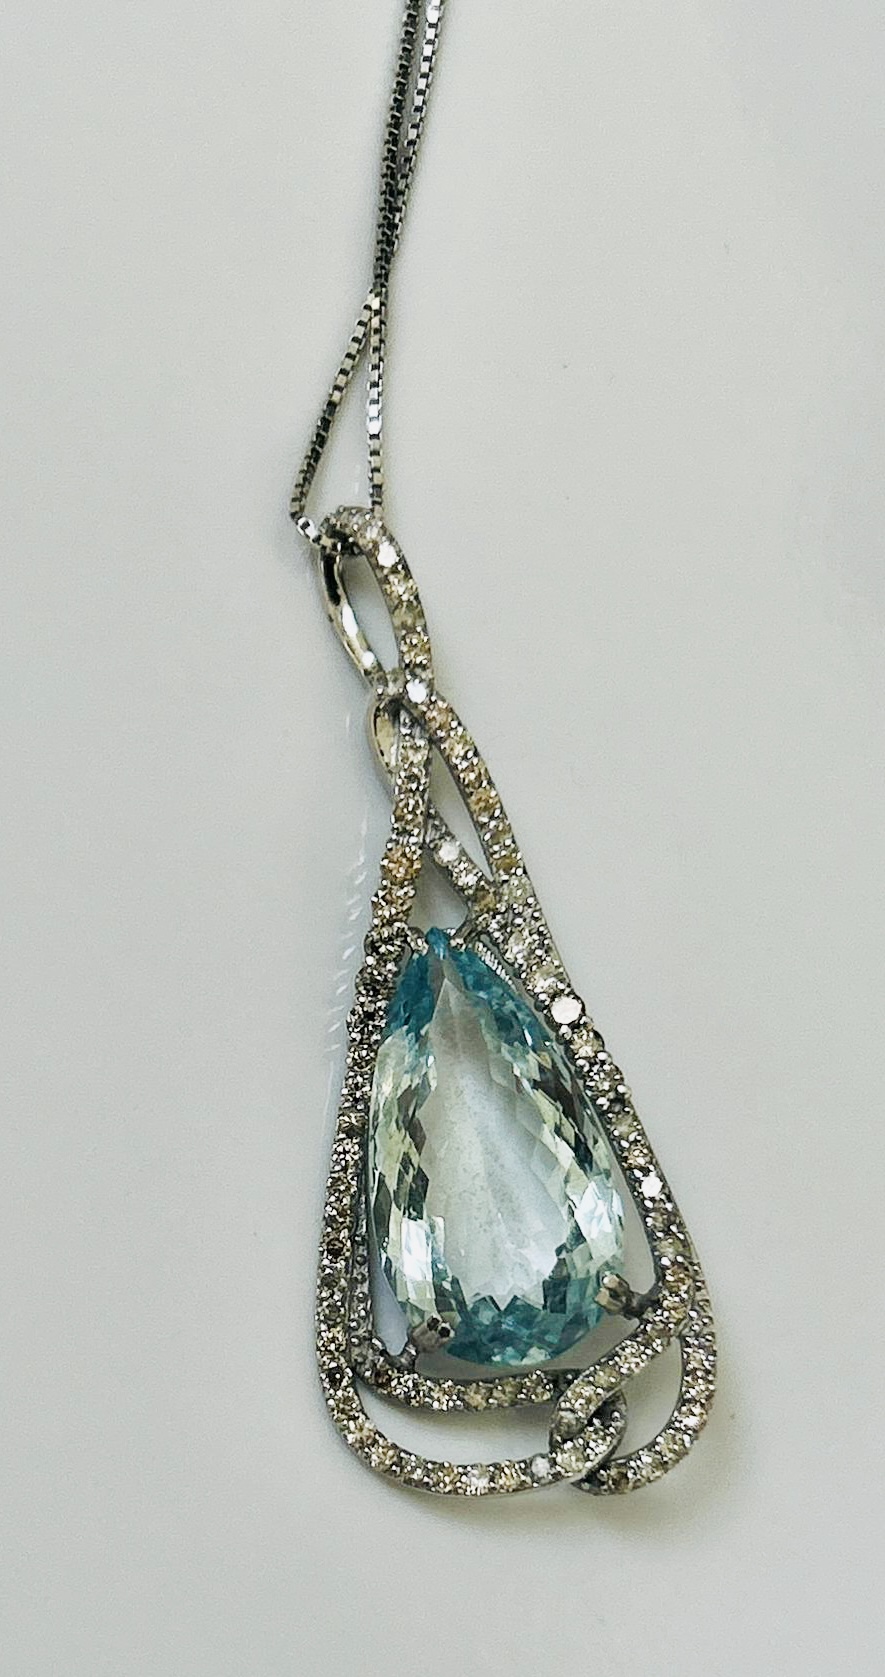 Beautiful Natural Flawless 8.81 CT Aquamarine Pendant With Diamonds and 18k Gold - Image 7 of 8